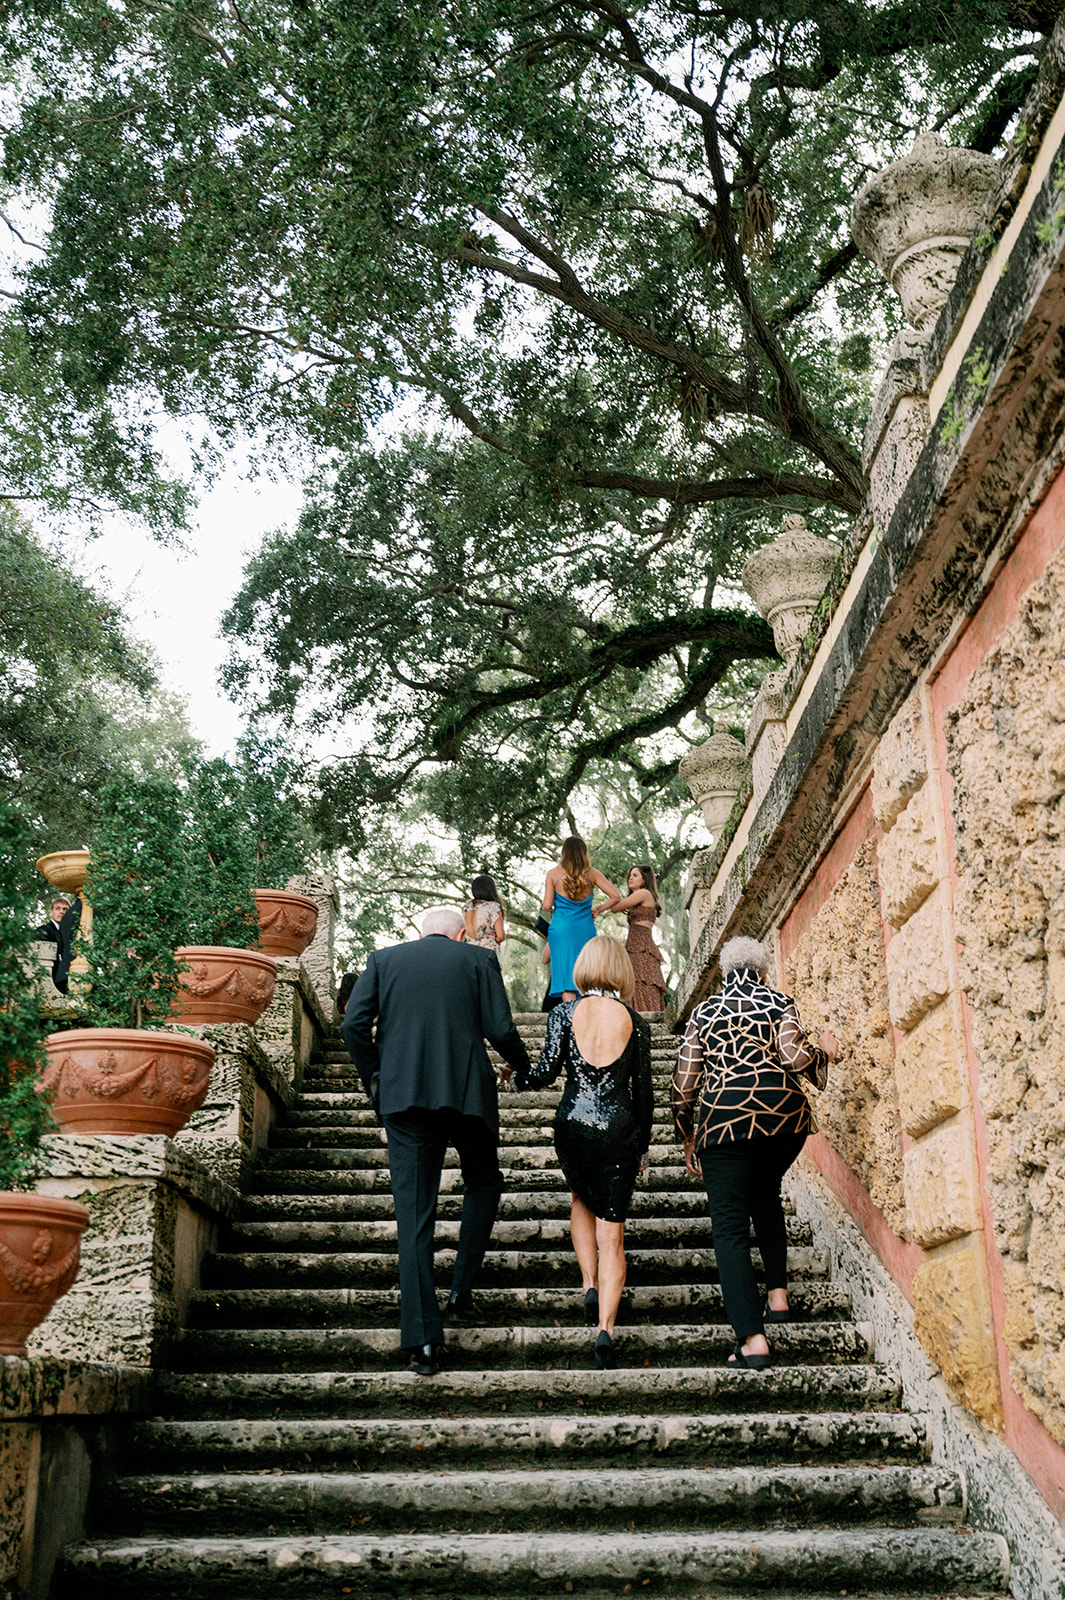 Wedding guests walking up the stone stairs at Vizcaya gardens.